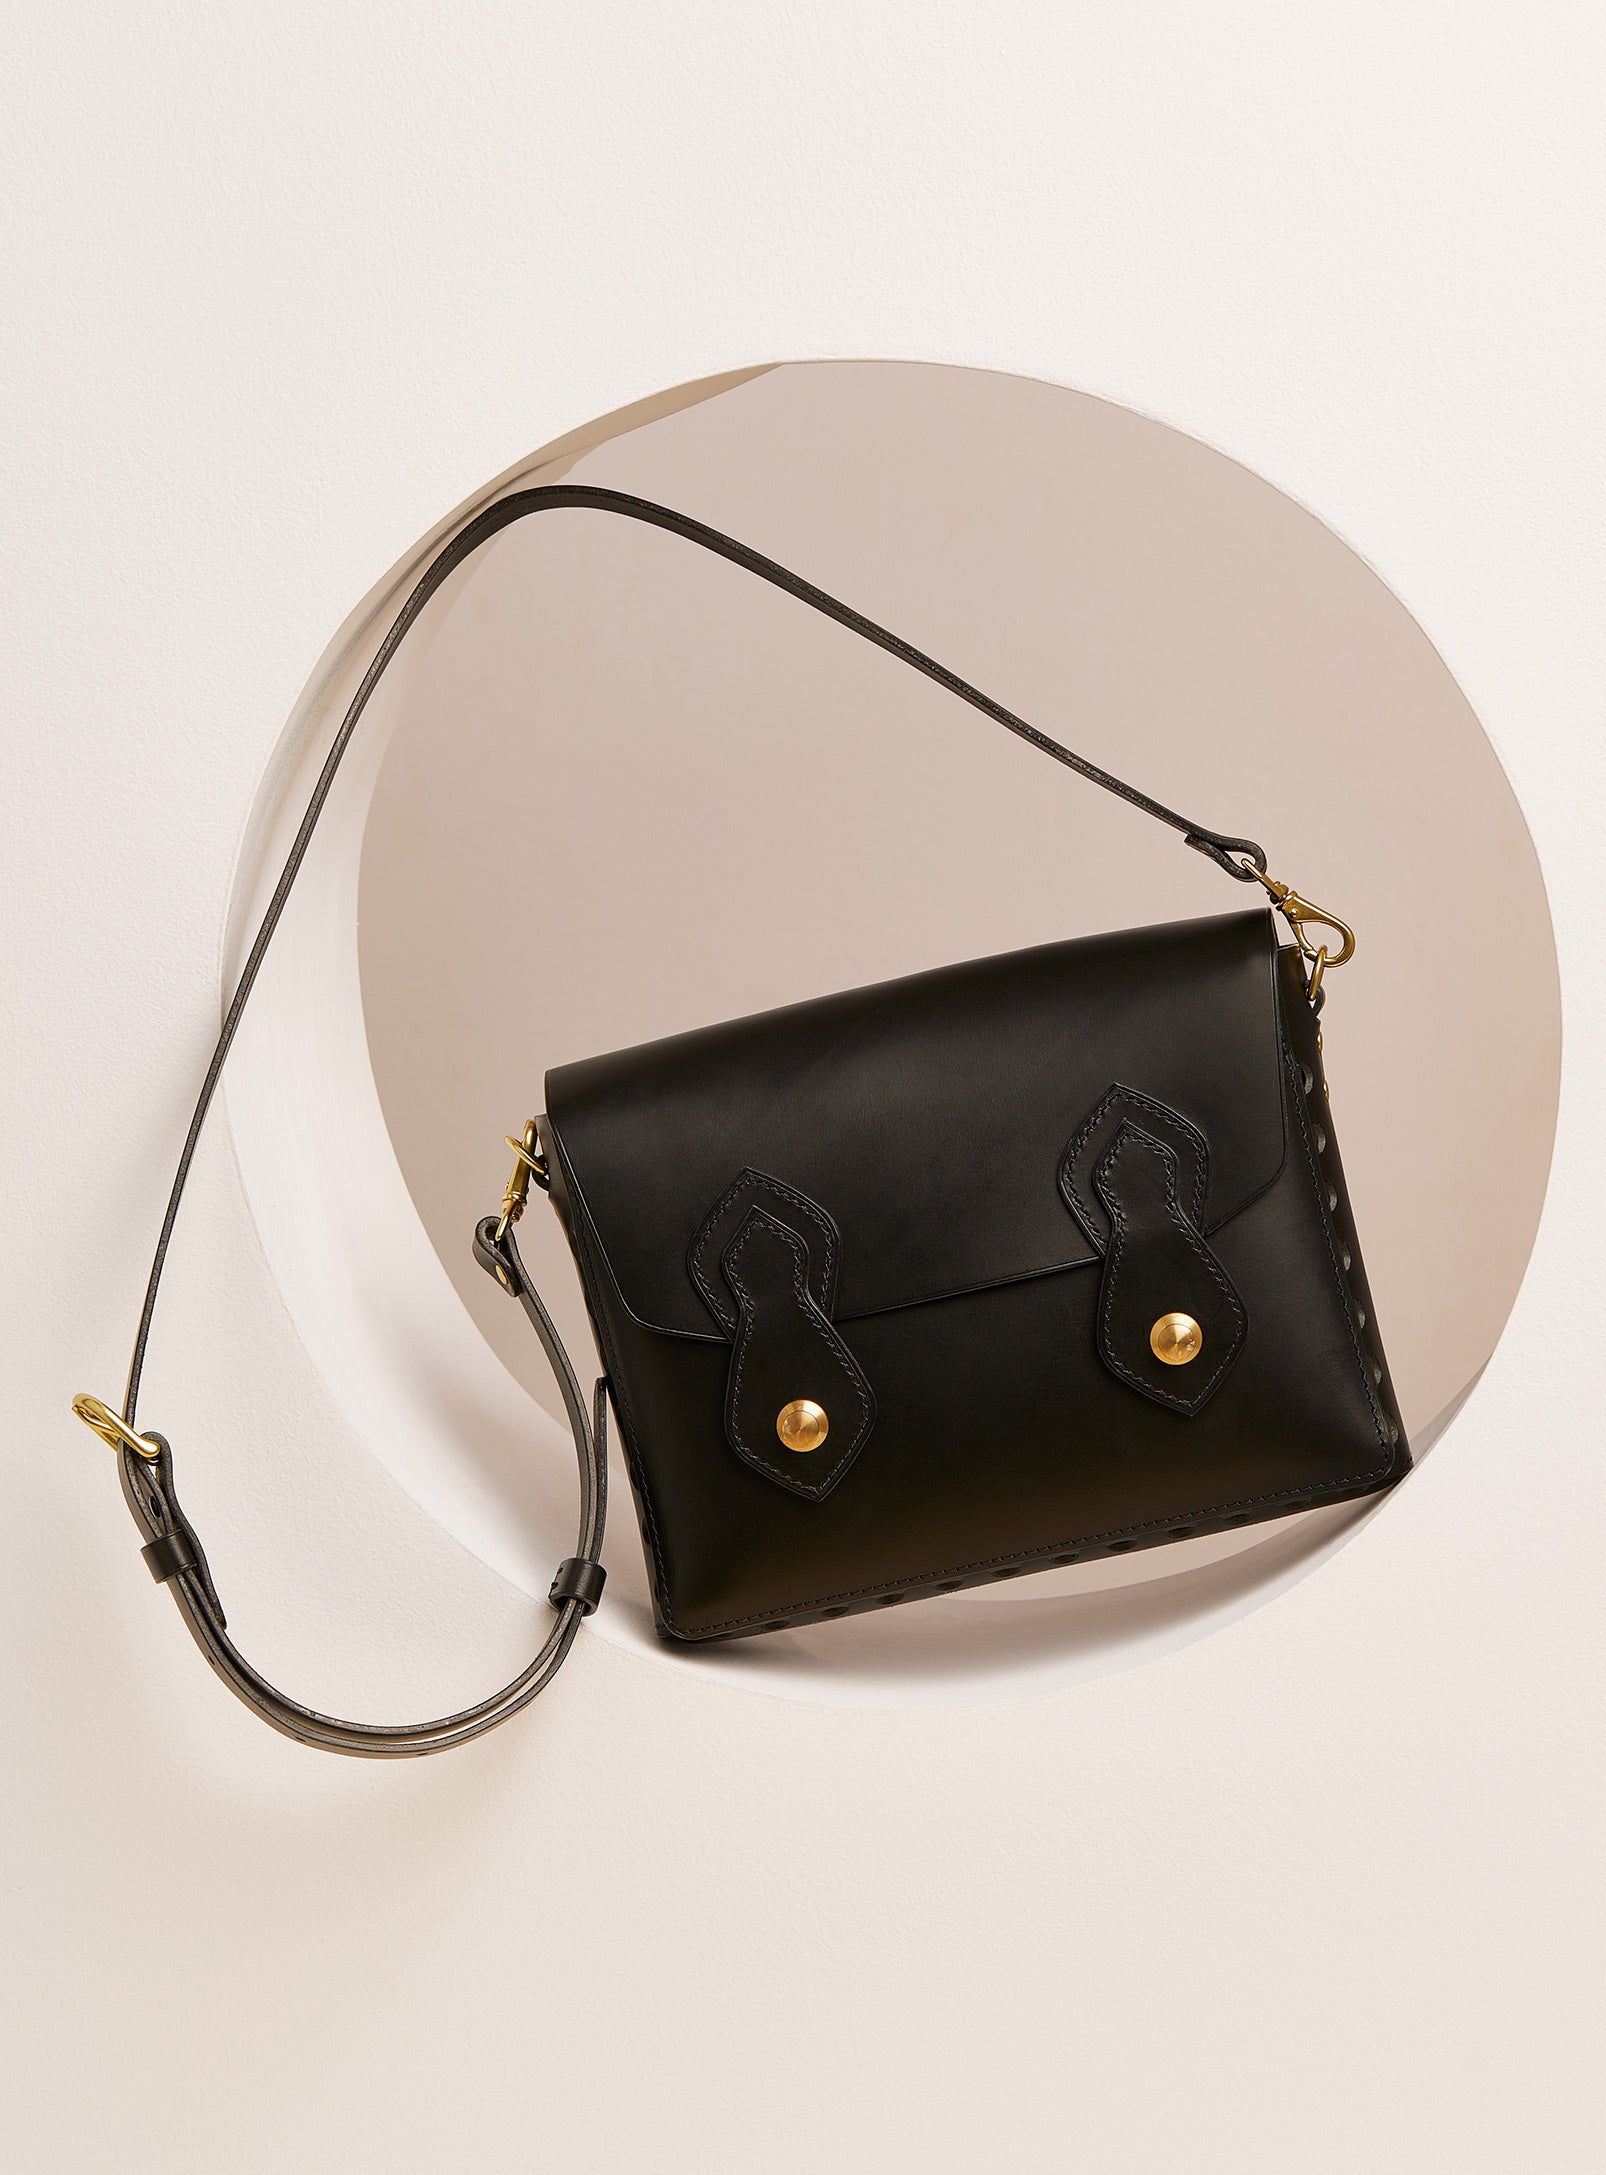 The modjūl odyssey bag in black. A large side bag with crossbody straps and double brass closure. Handcrafted in Canada using vegetable dyed Italian leather and quality brass hardware. 